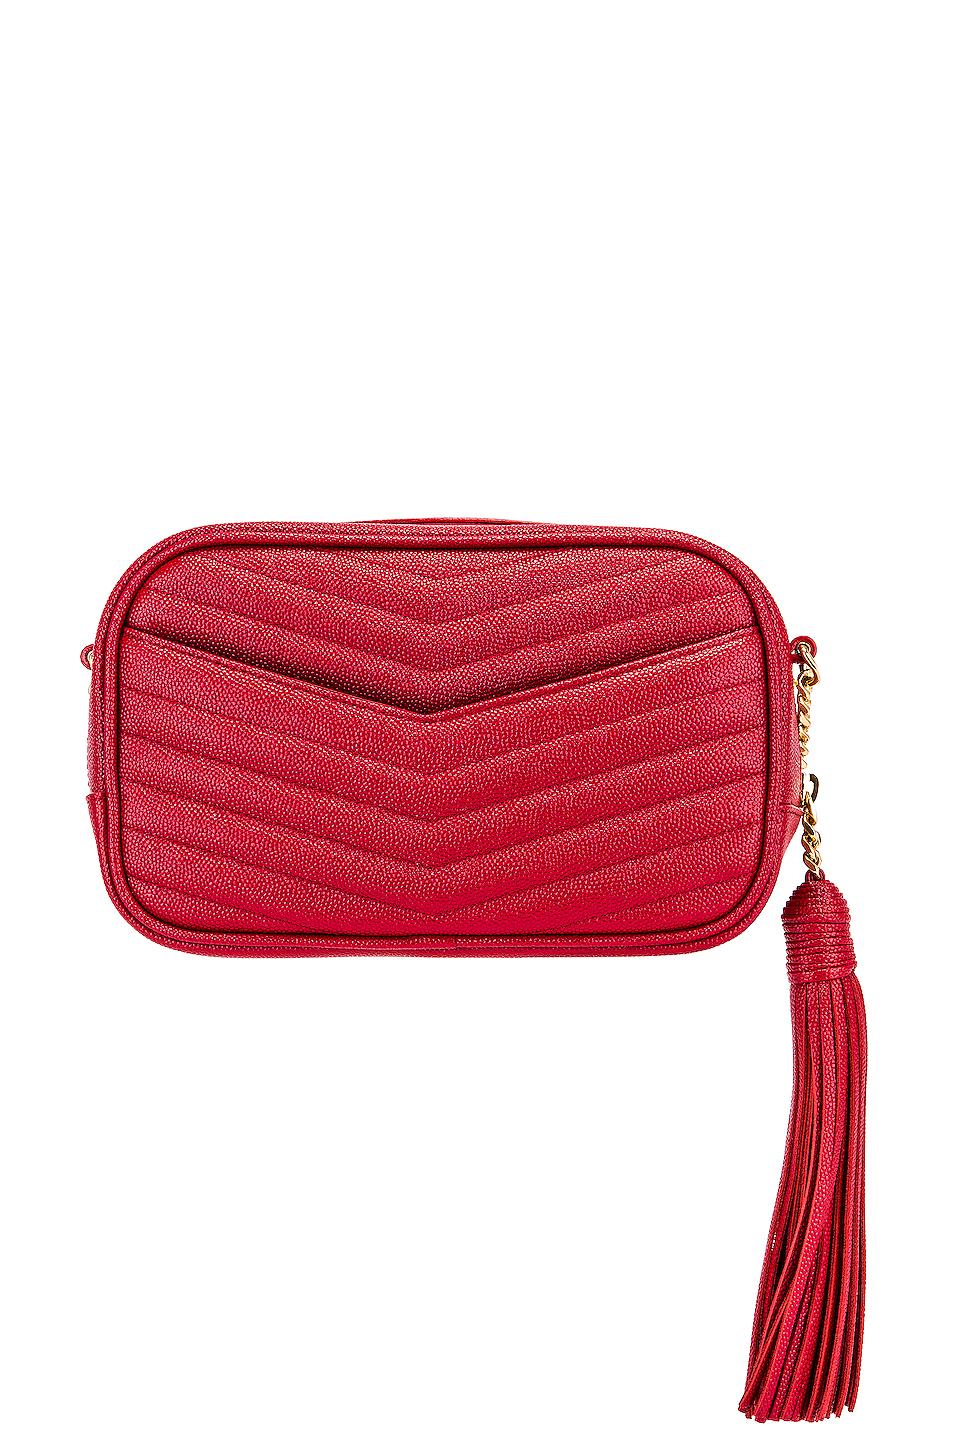 Saint Laurent Leather Monogramme Mini Lou Crossbody Bag in Red - Lyst